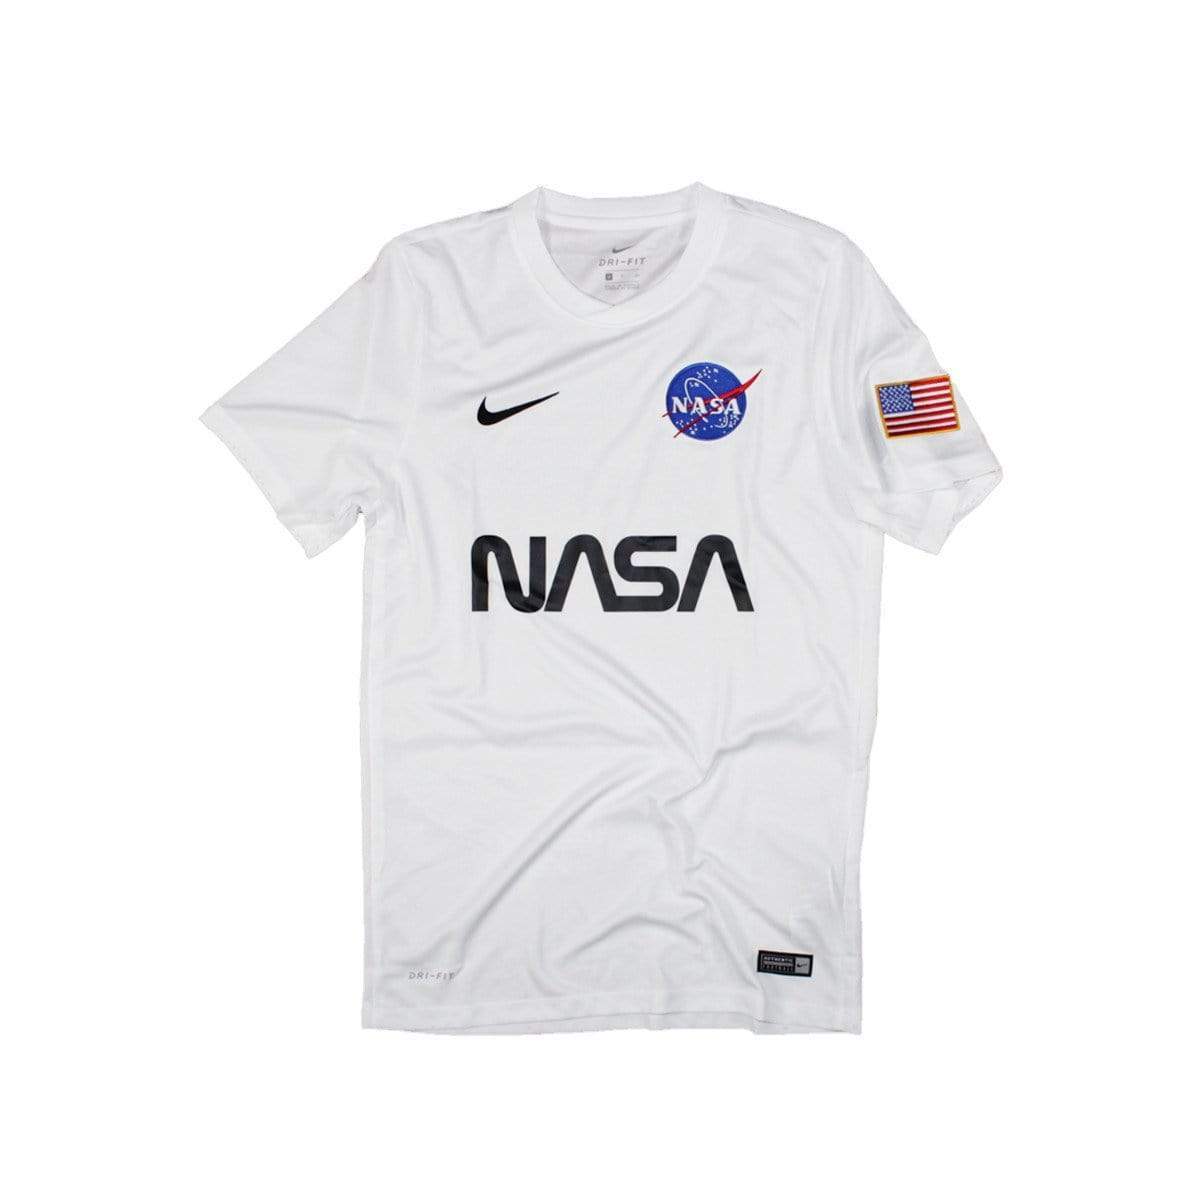 fængelsflugt Hare føderation Nasa Astronaut Jersey by The Concept Club White - Football Shirt Collective